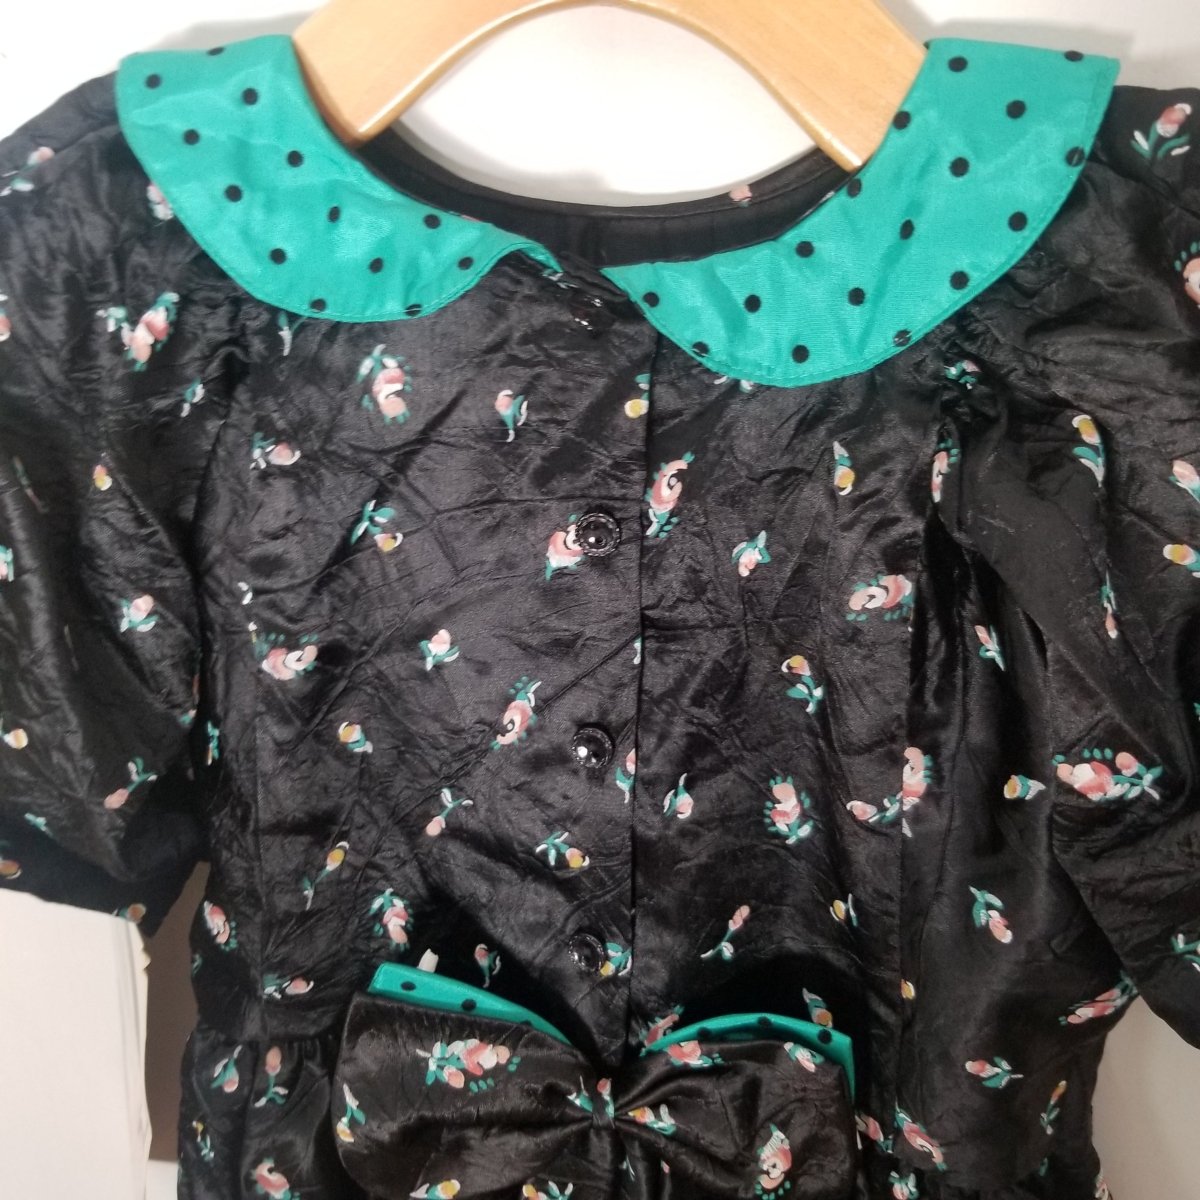 80s Black Crushed Satin Peter Pan Collar Dress Girls Size 6 - themallvintage The Mall Vintage